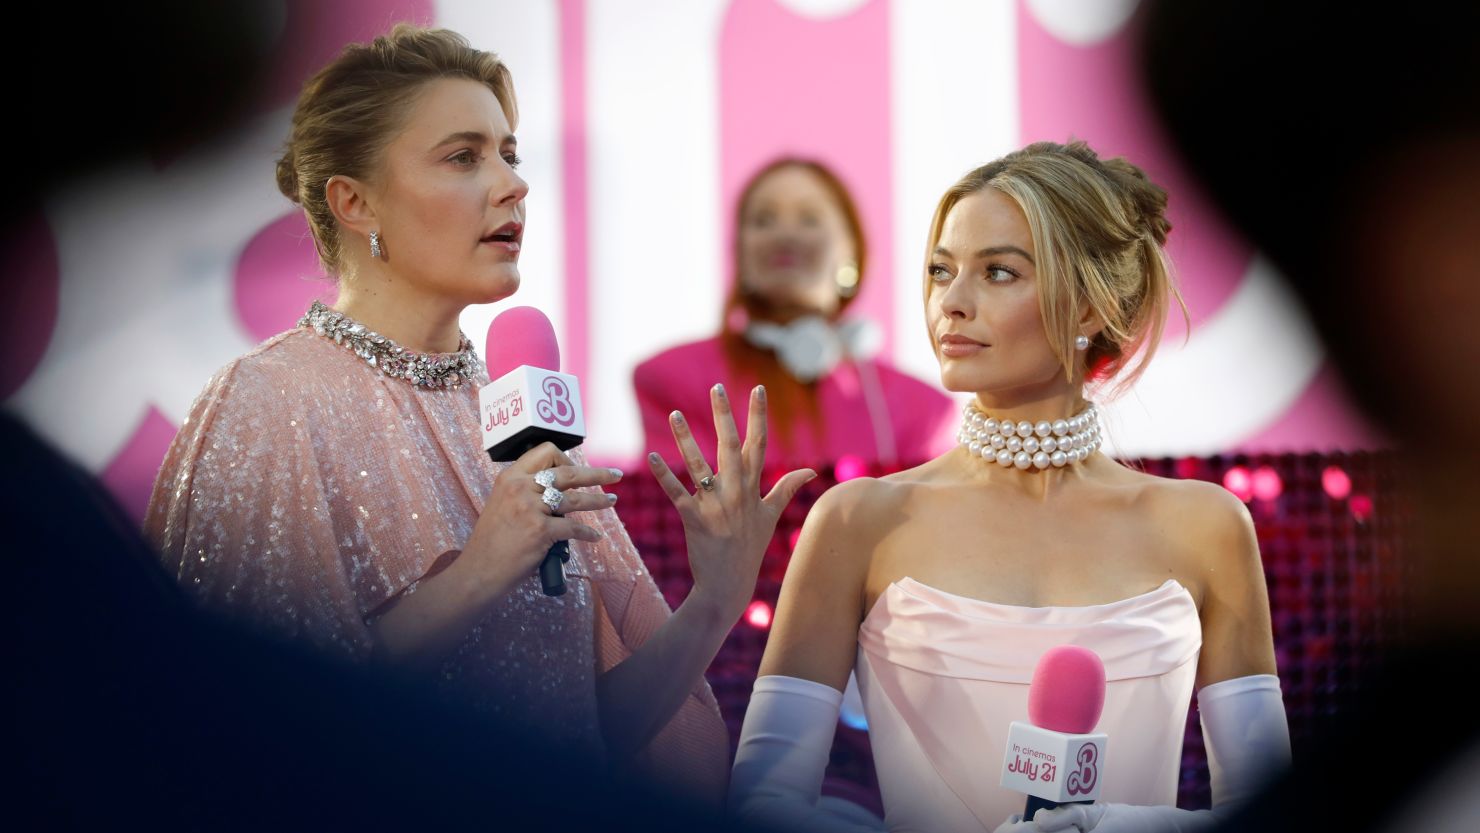 LONDON, ENGLAND - JULY 12: Greta Gerwig and Margot Robbie on stage during The European Premiere Of "Barbie" at Cineworld Leicester Square on July 12, 2023 in London, England. (Photo by Tristan Fewings/Getty Images for Warner Bros.)